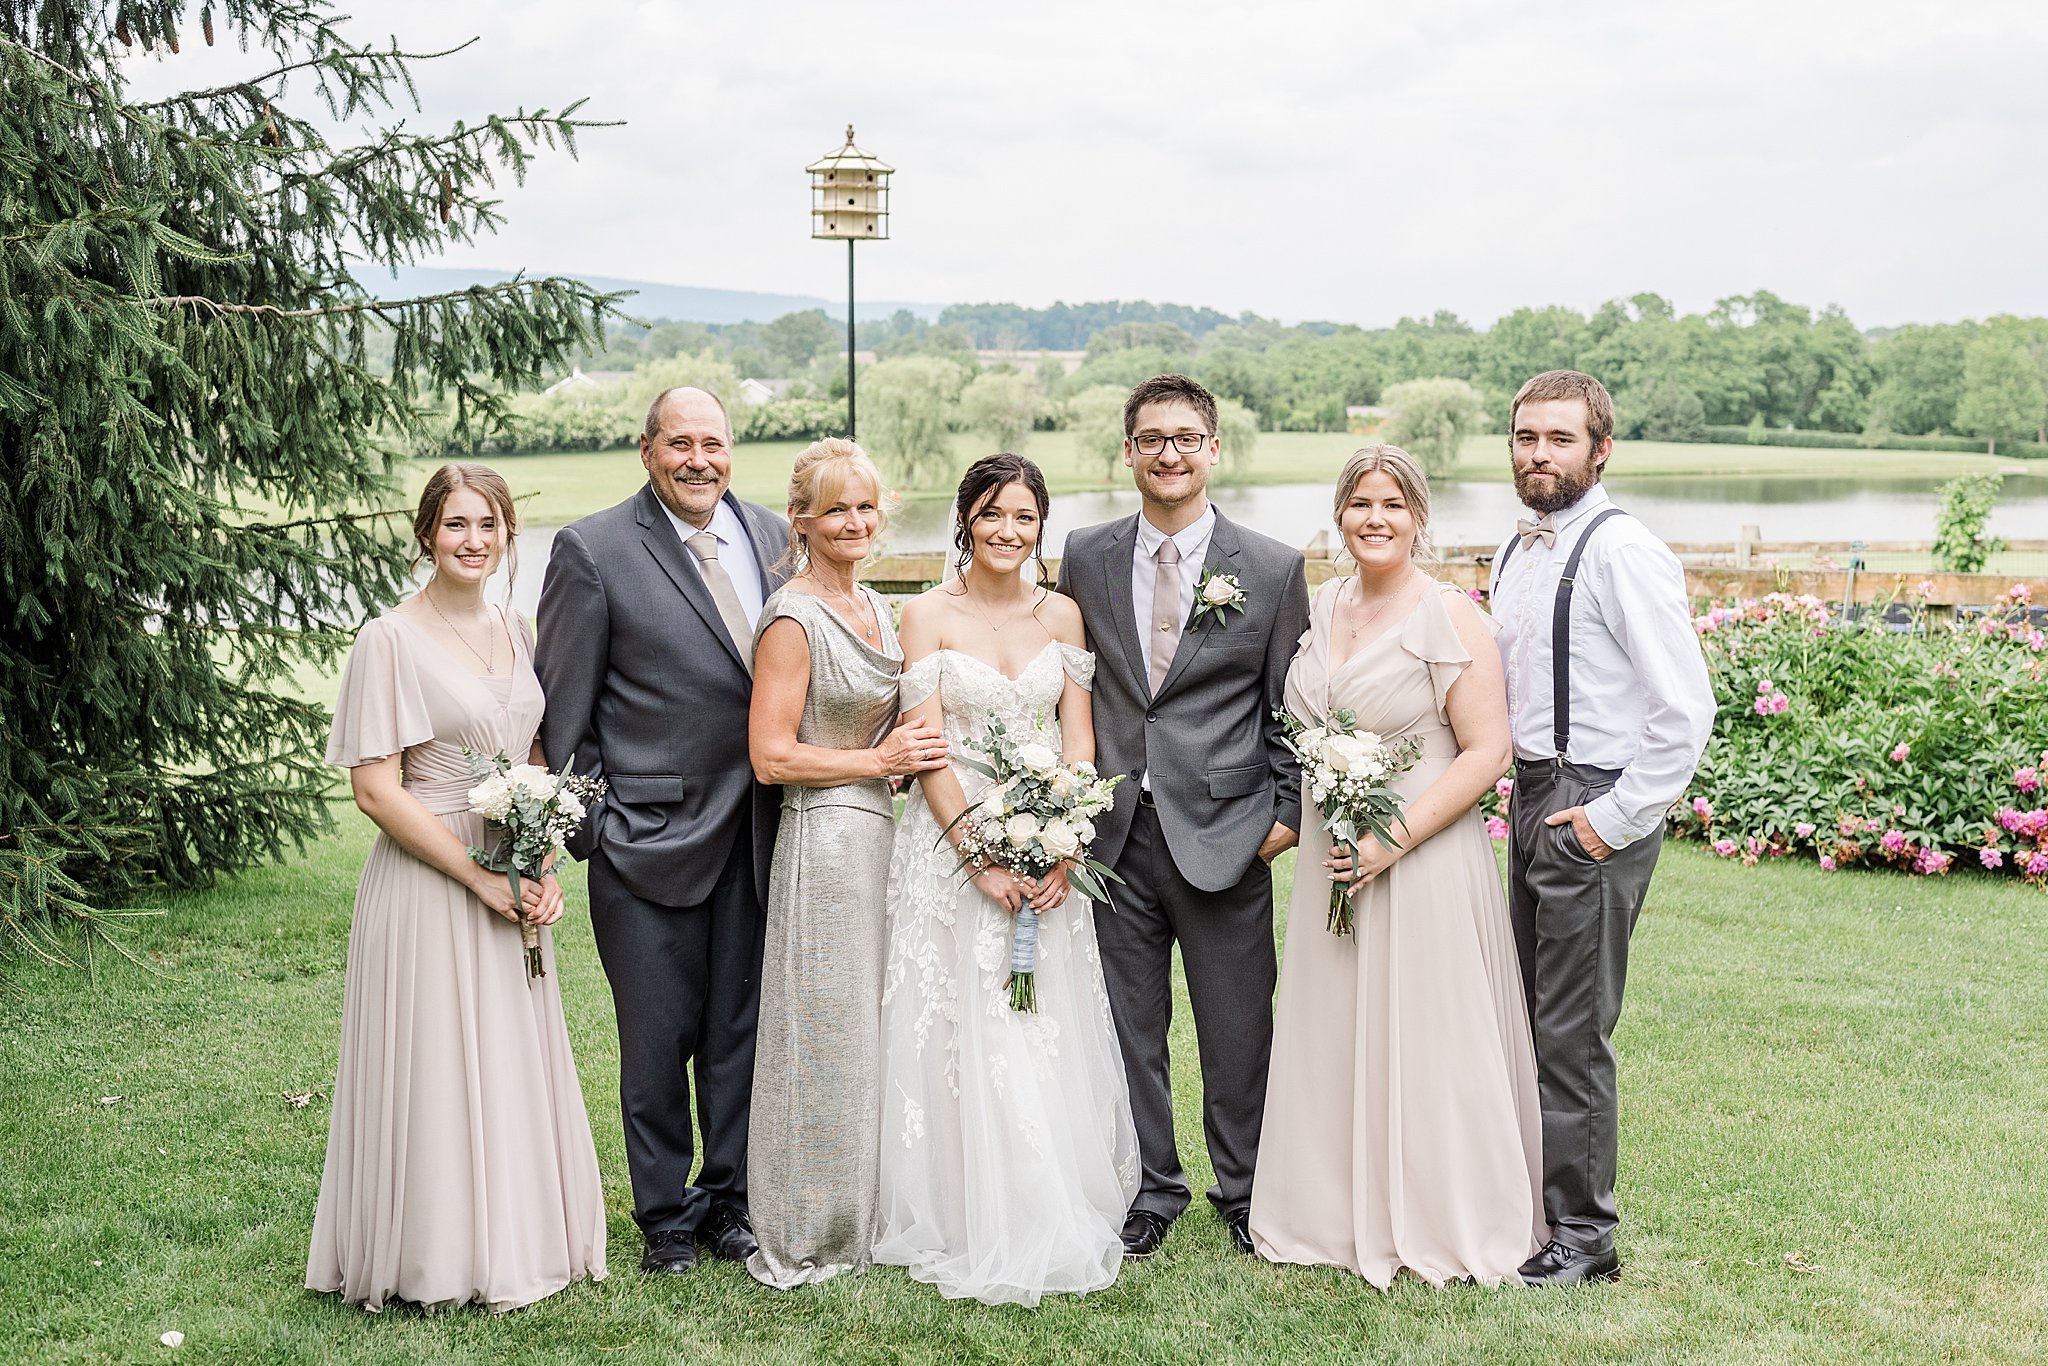 Wind in the Willows Grantville PA Spring Wedding Photography_4951.jpg